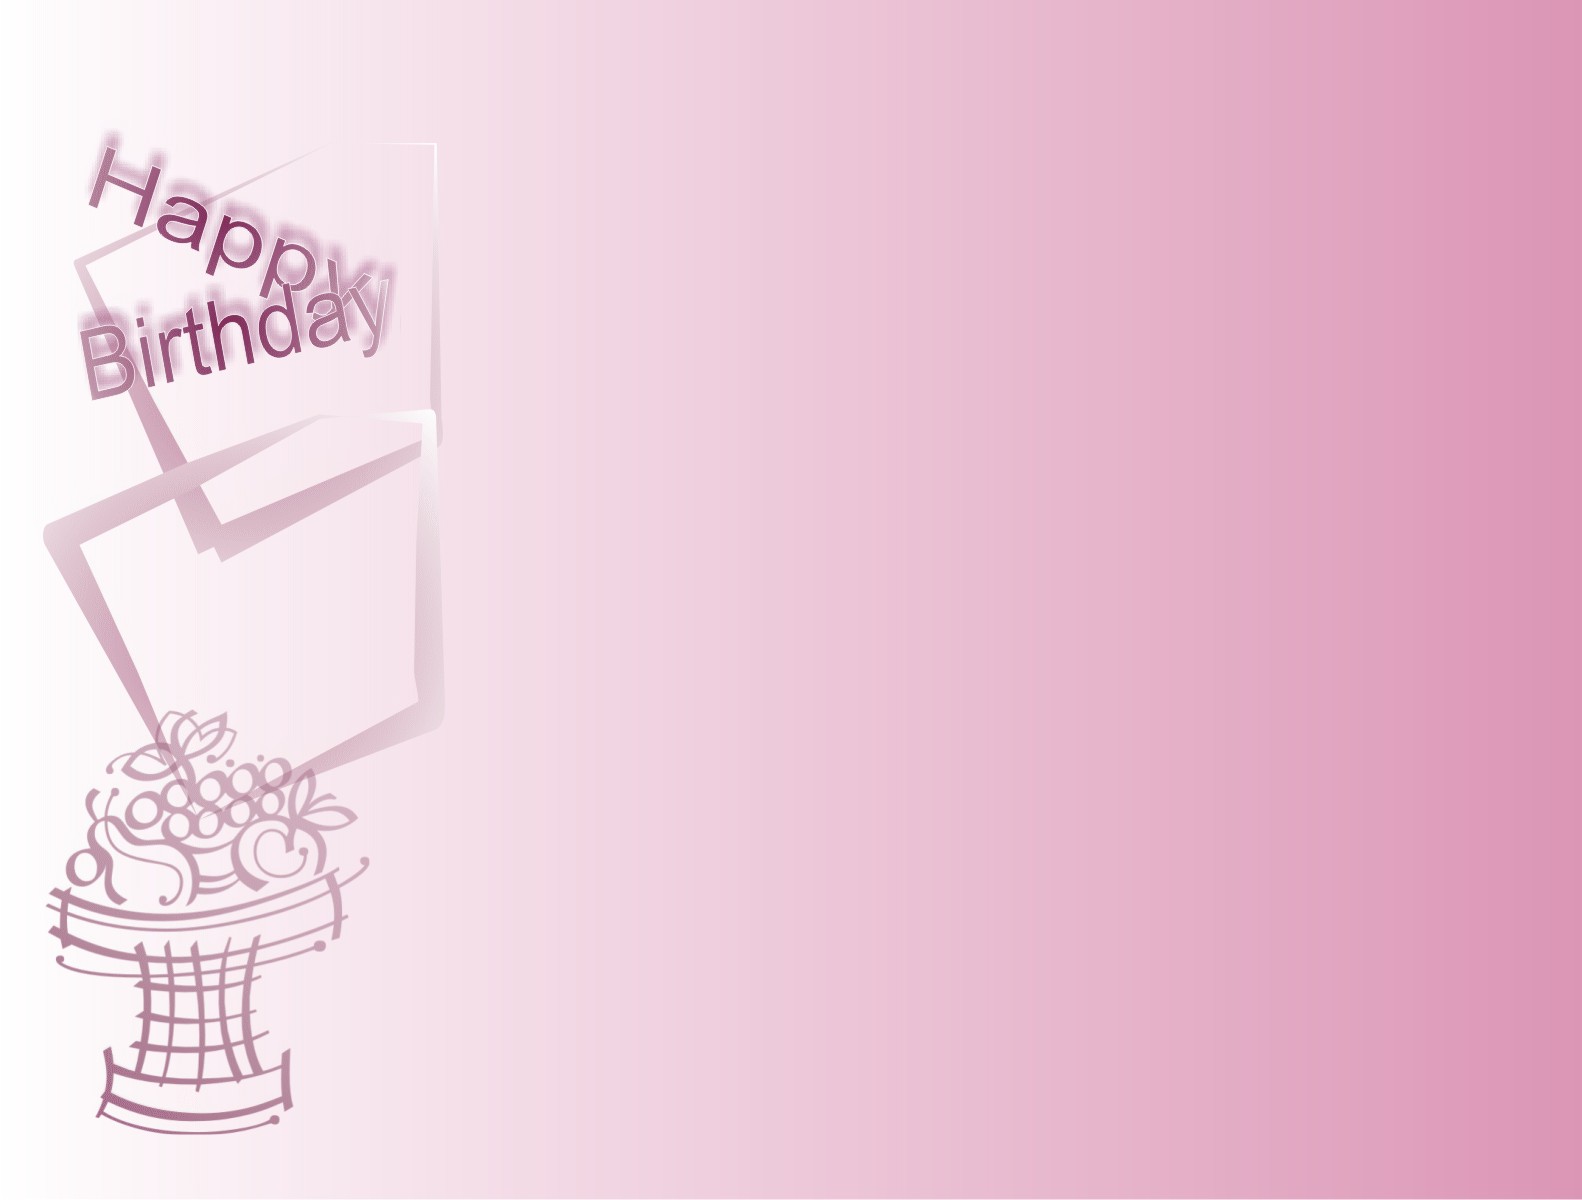 Happy birthday wishes Wallpaper With Resolutions 15821200 Pixel 1582x1200